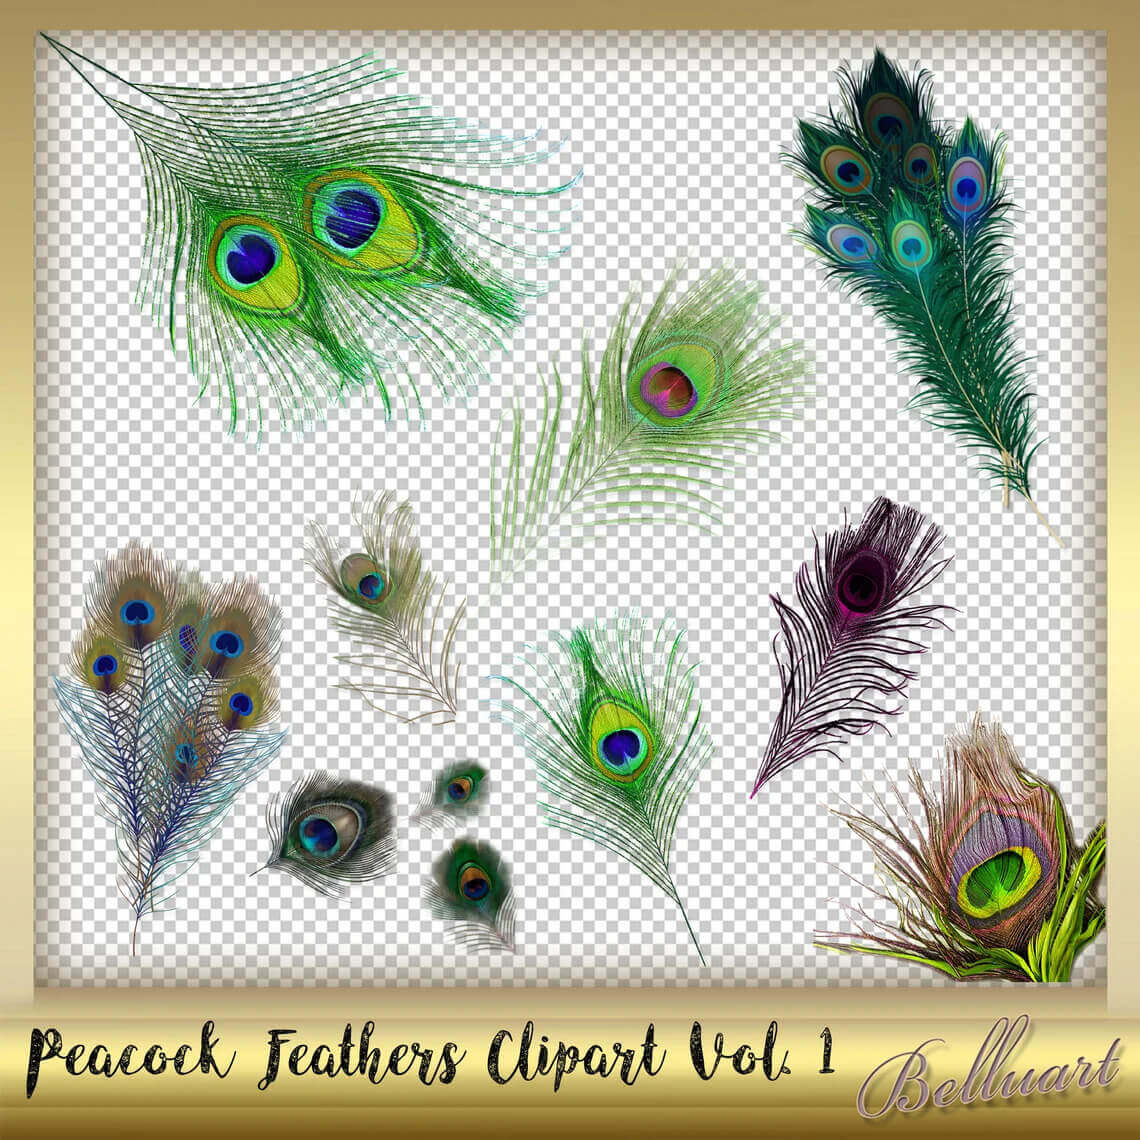 Collection of peacock feathers clipart vol 1.